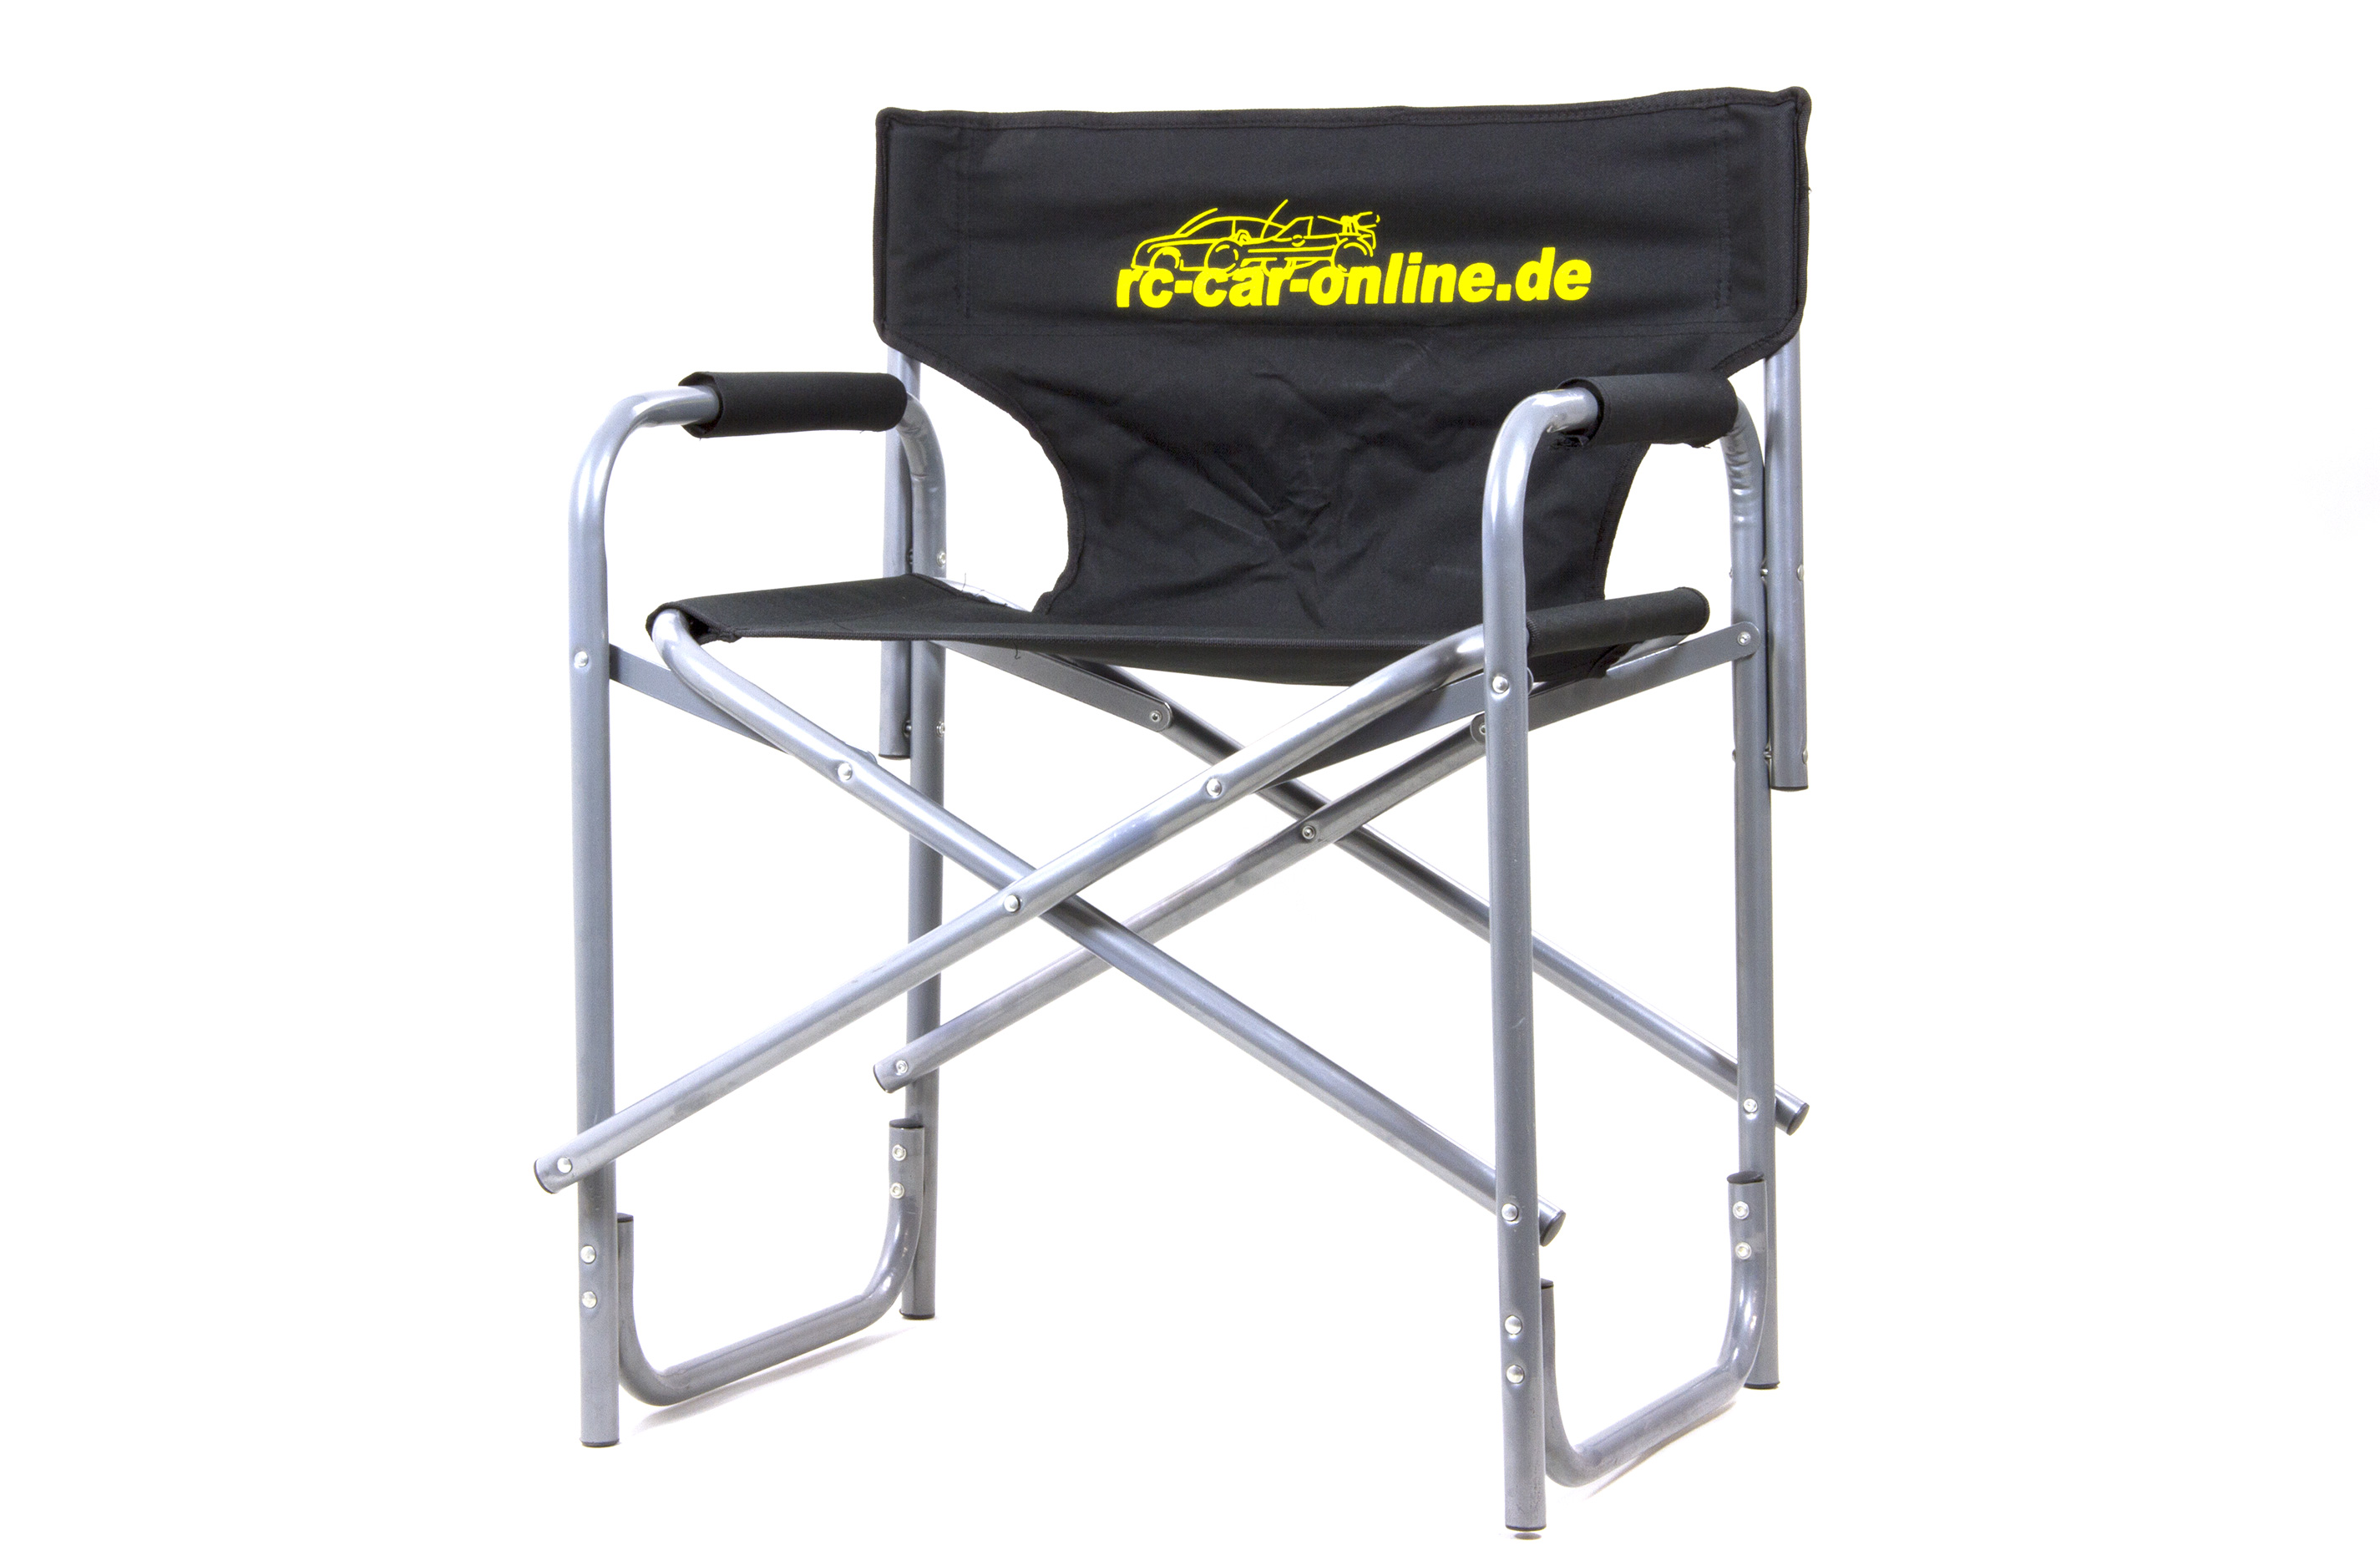 y0780 RC-Car Comfort relax chair / camp-chair